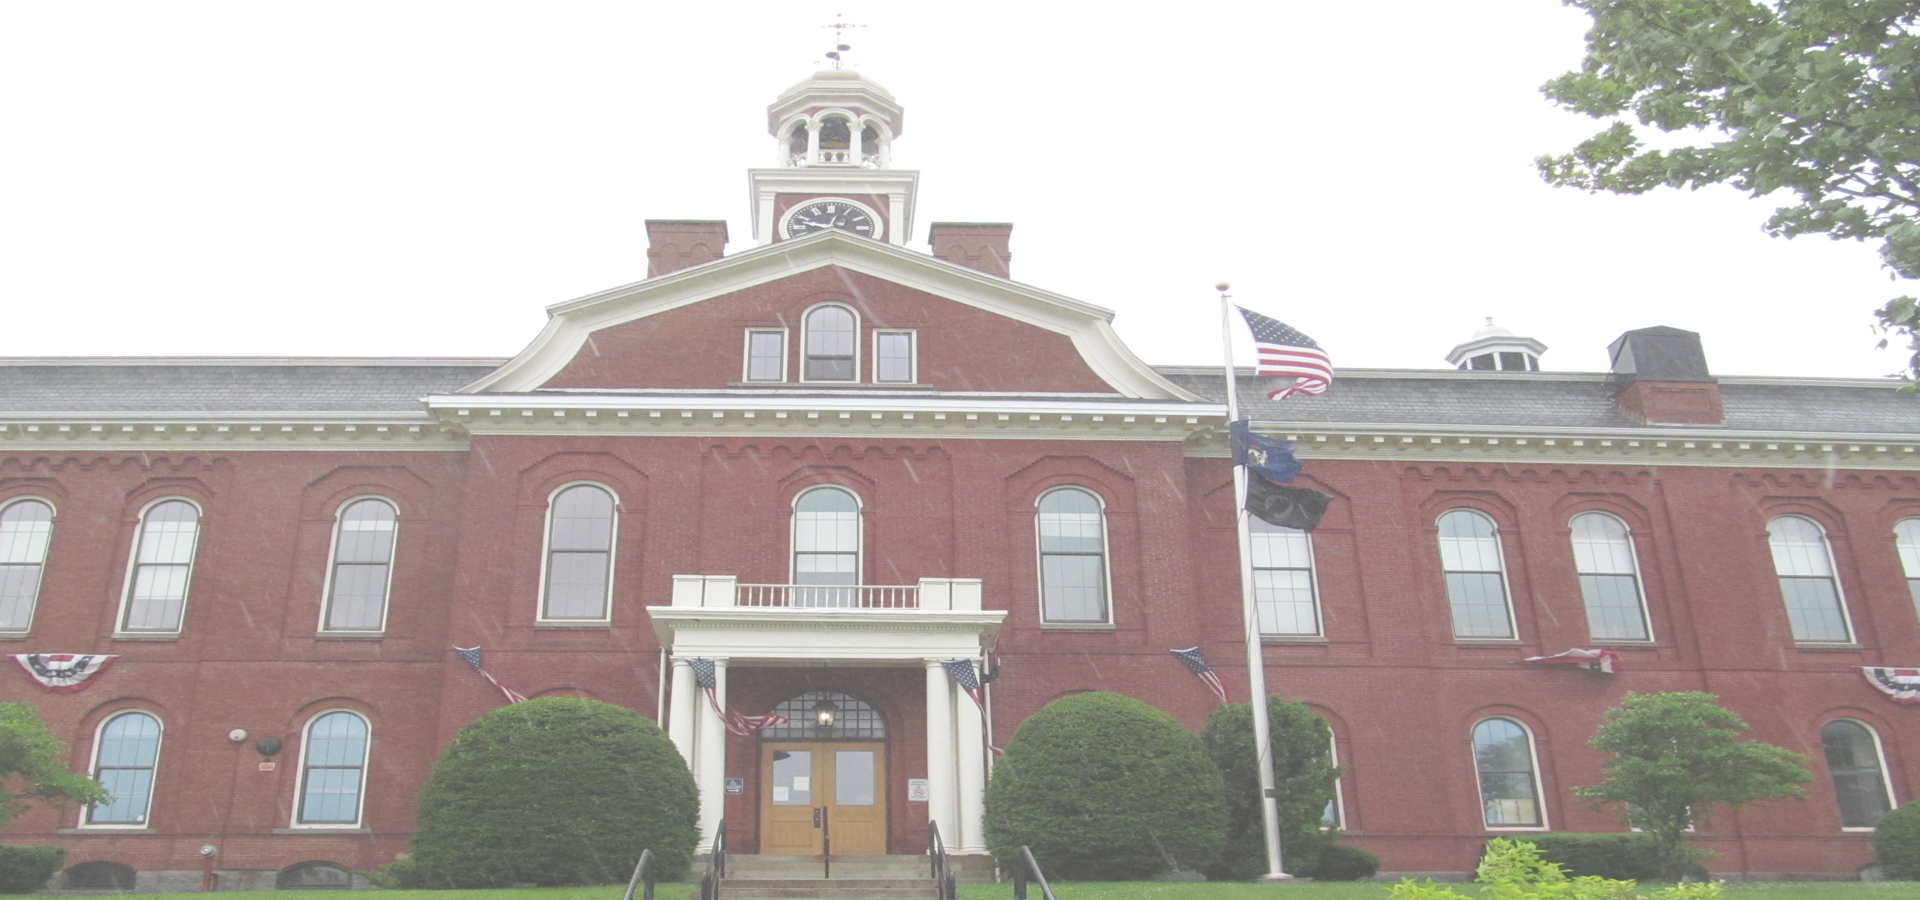 Aroostook County Courthouse, State of Maine